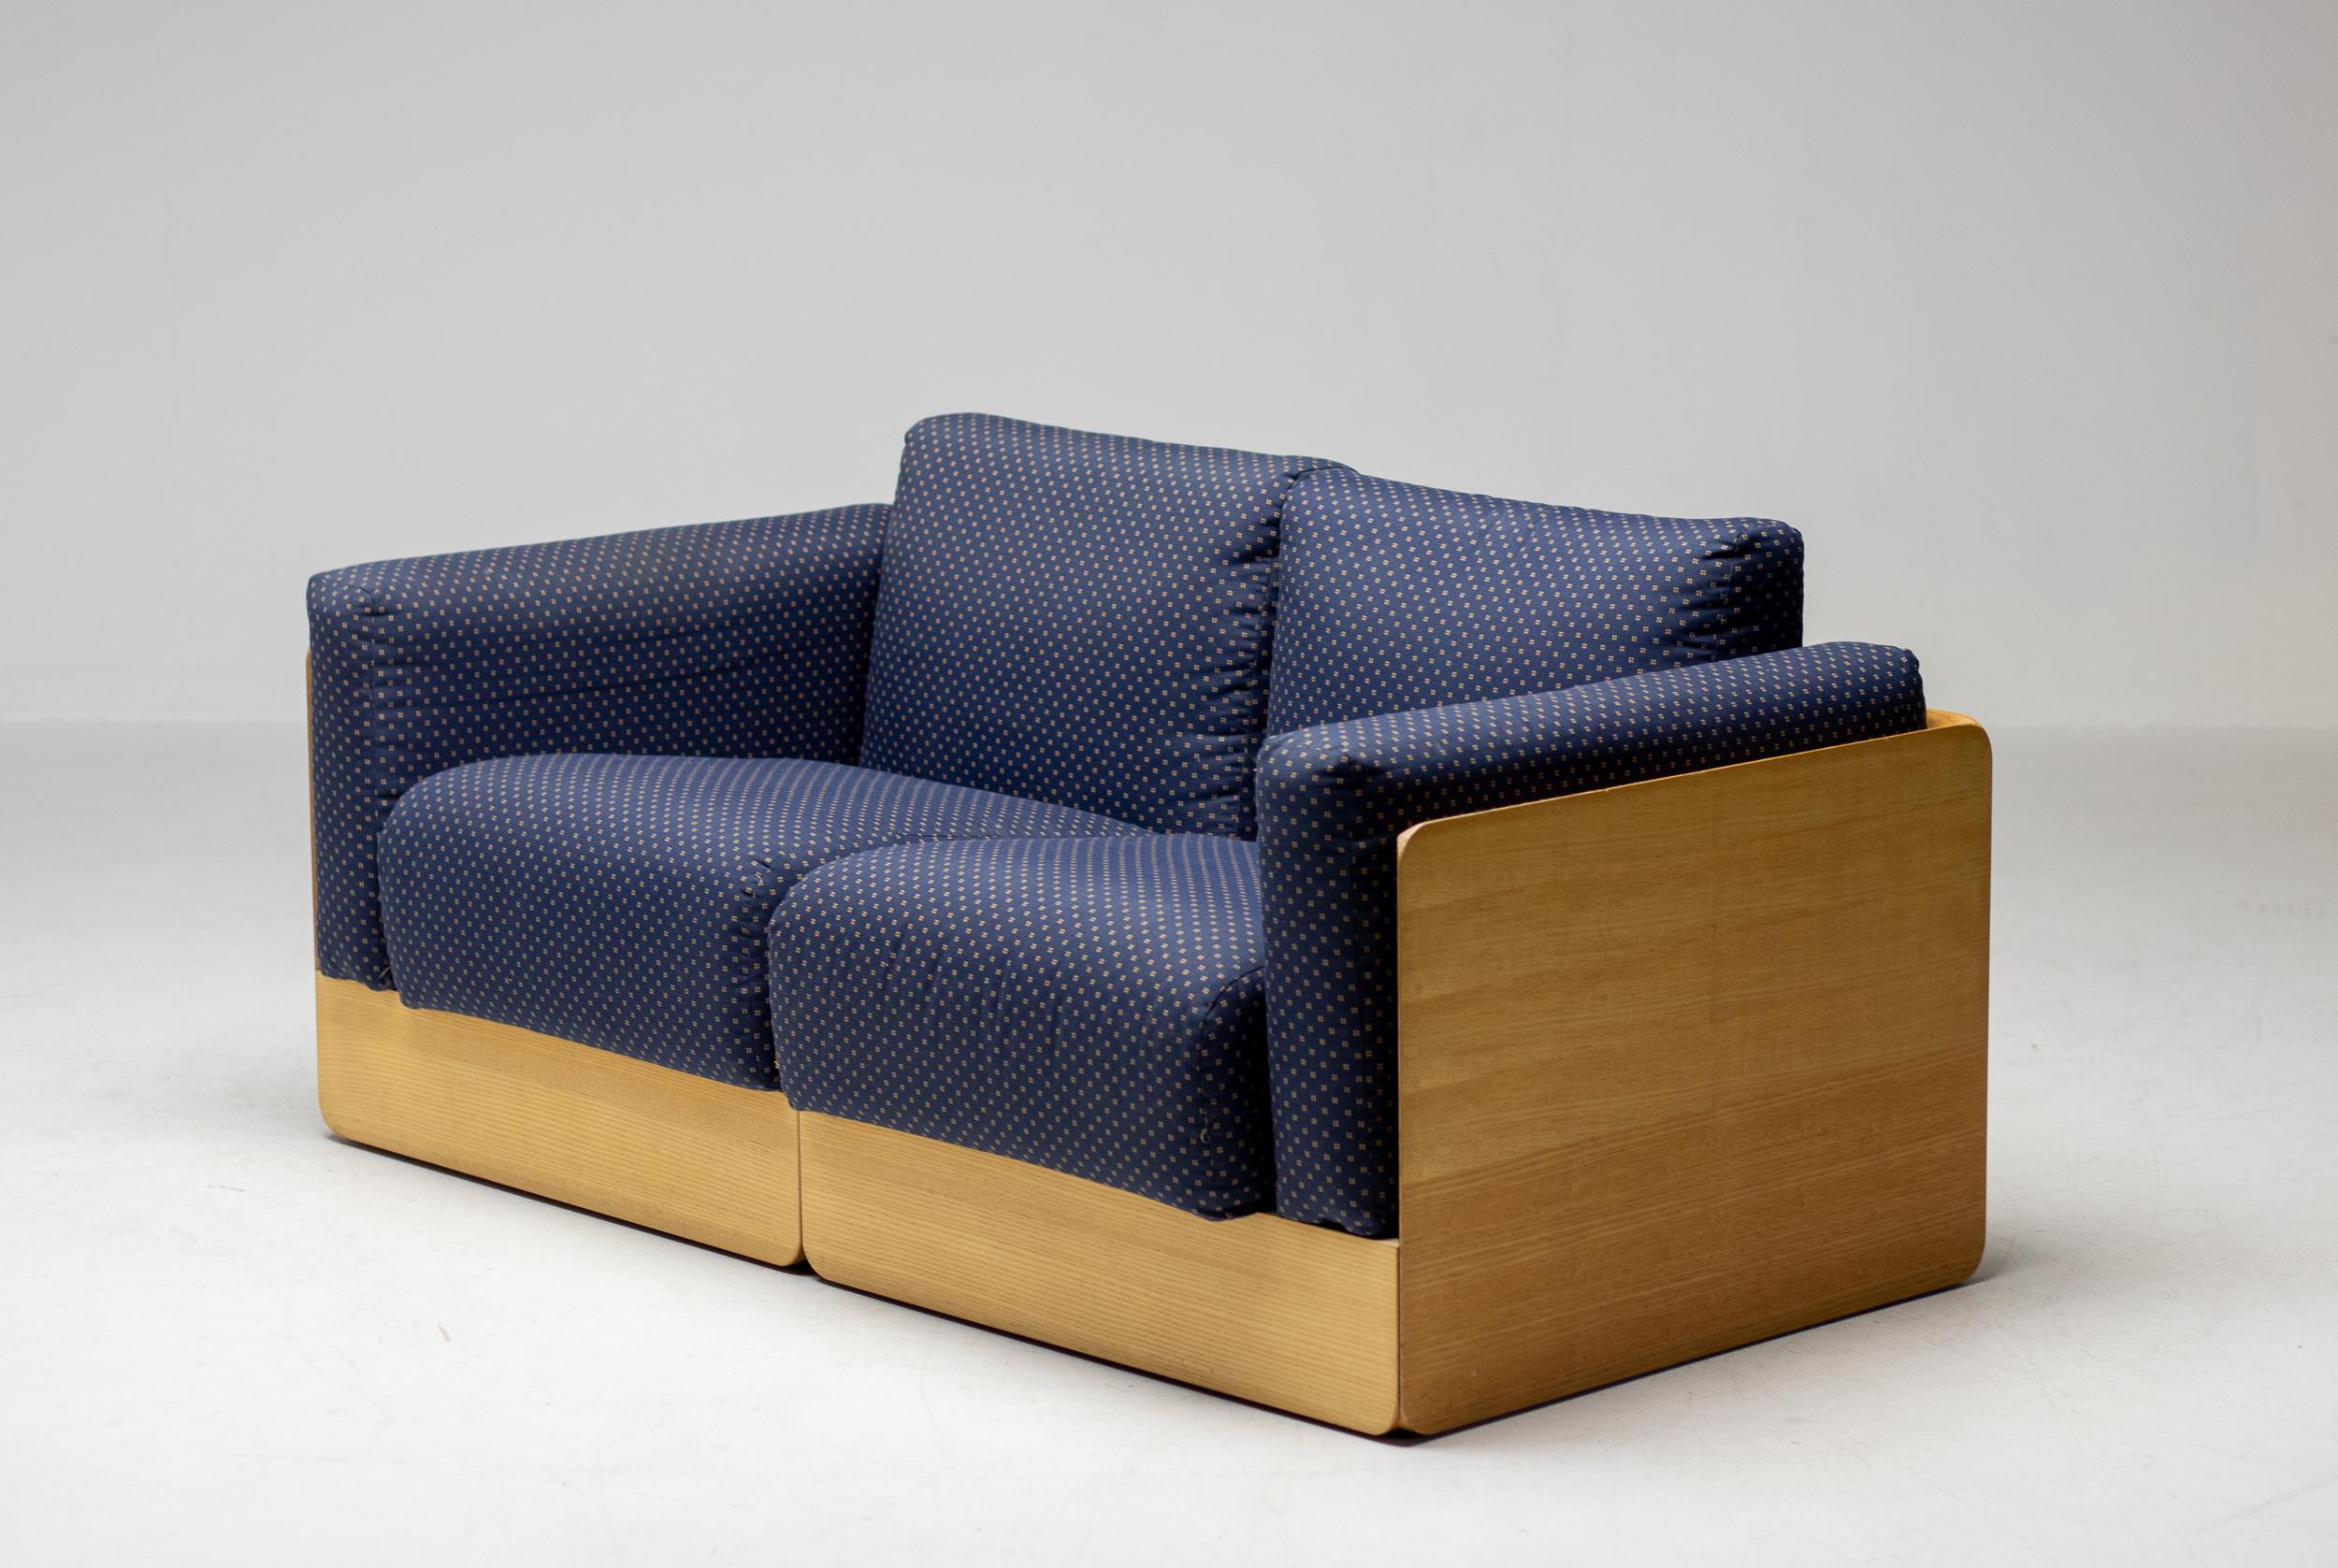 Comfortable pair of two-seater sofas designed by Derk Jan de Vries for Domus.
Ash plywood frame with trademark rounded edges and loose cushions upholstered in fabric.
The sofas have wheels at the rear to move them around easily. 
Two available,